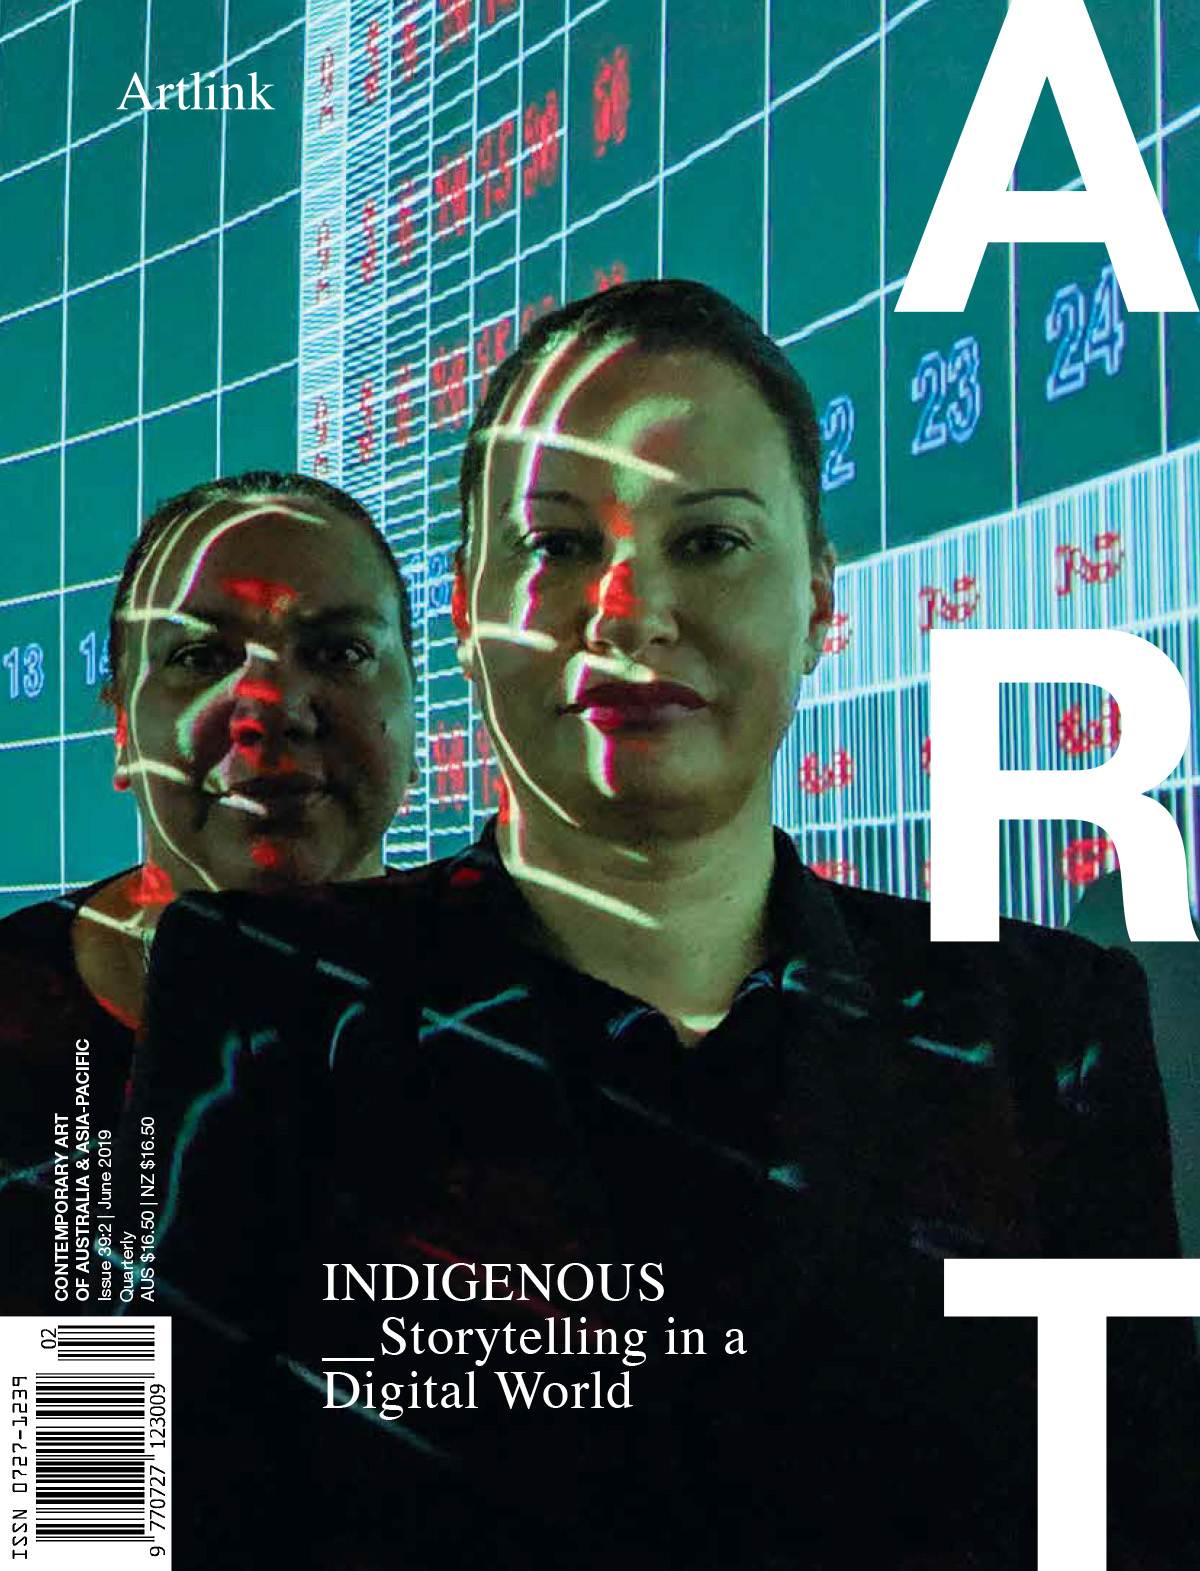 Issue 39:2 | June 2019 | Indigenous: Storytelling in a Digital World